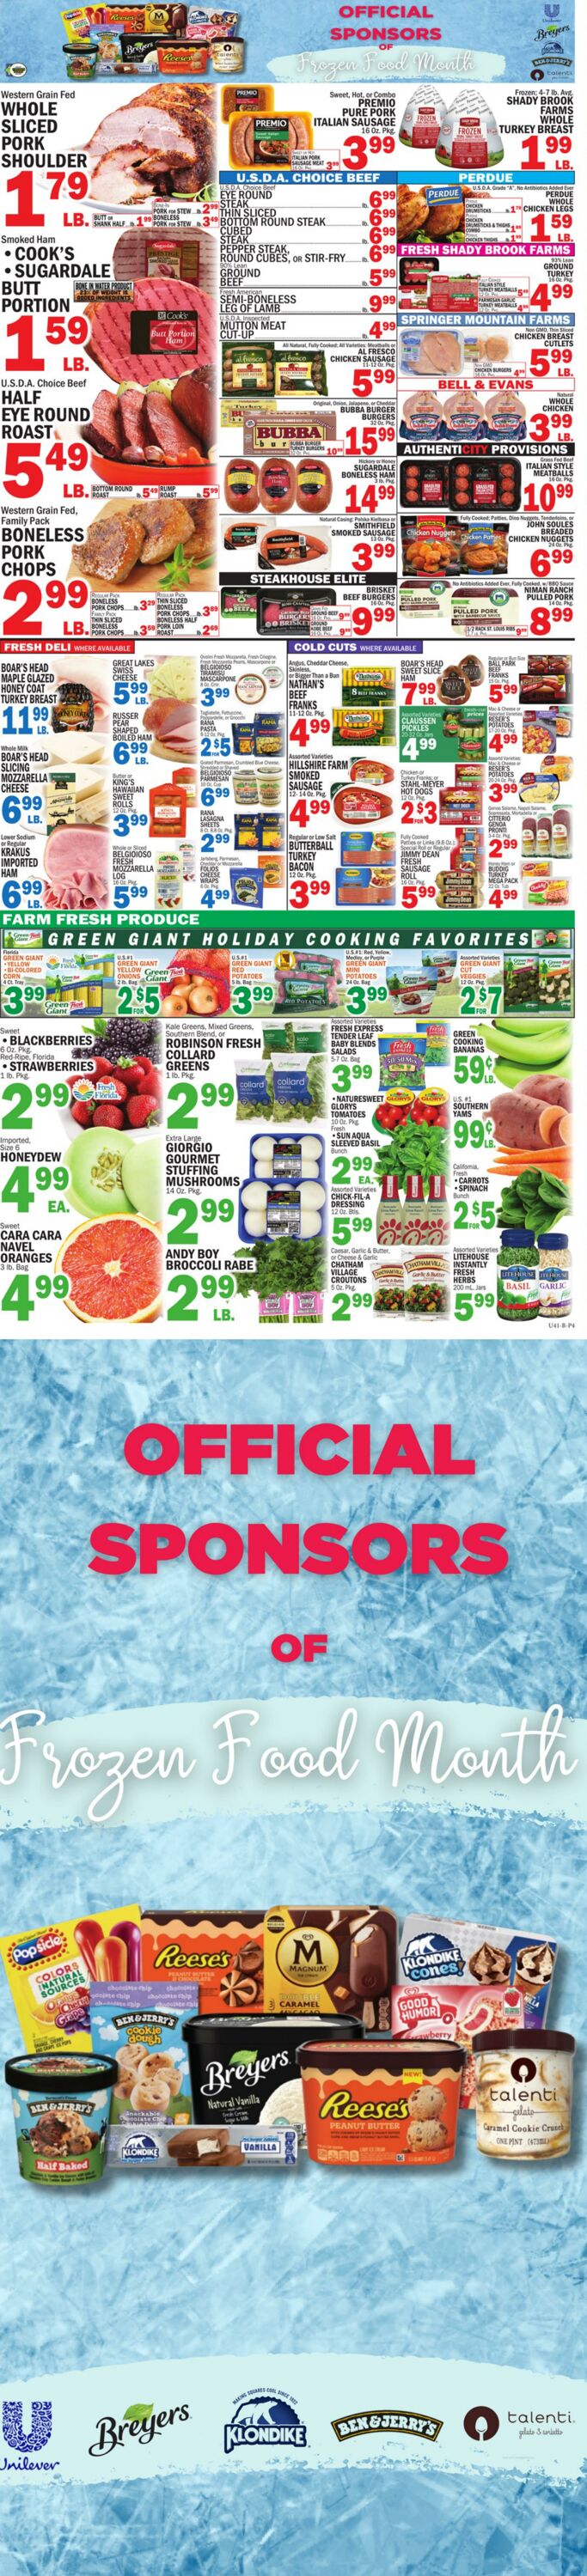 Weekly ad CTown 03/22/2024 - 03/28/2024